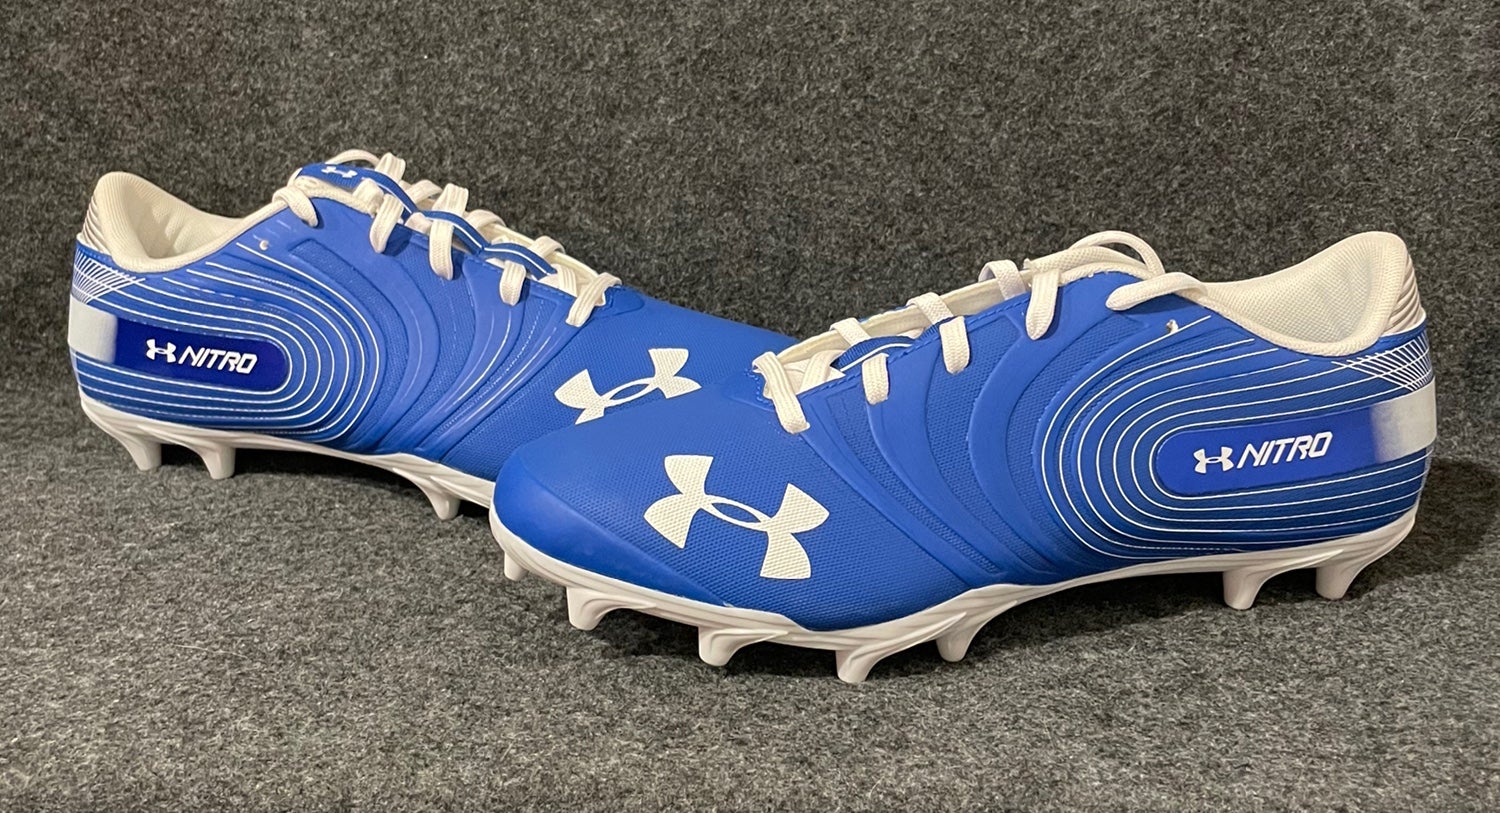 Under Armour Nitro Low MC Football Cleats 3000182-400 Multiple Sizes NEW 